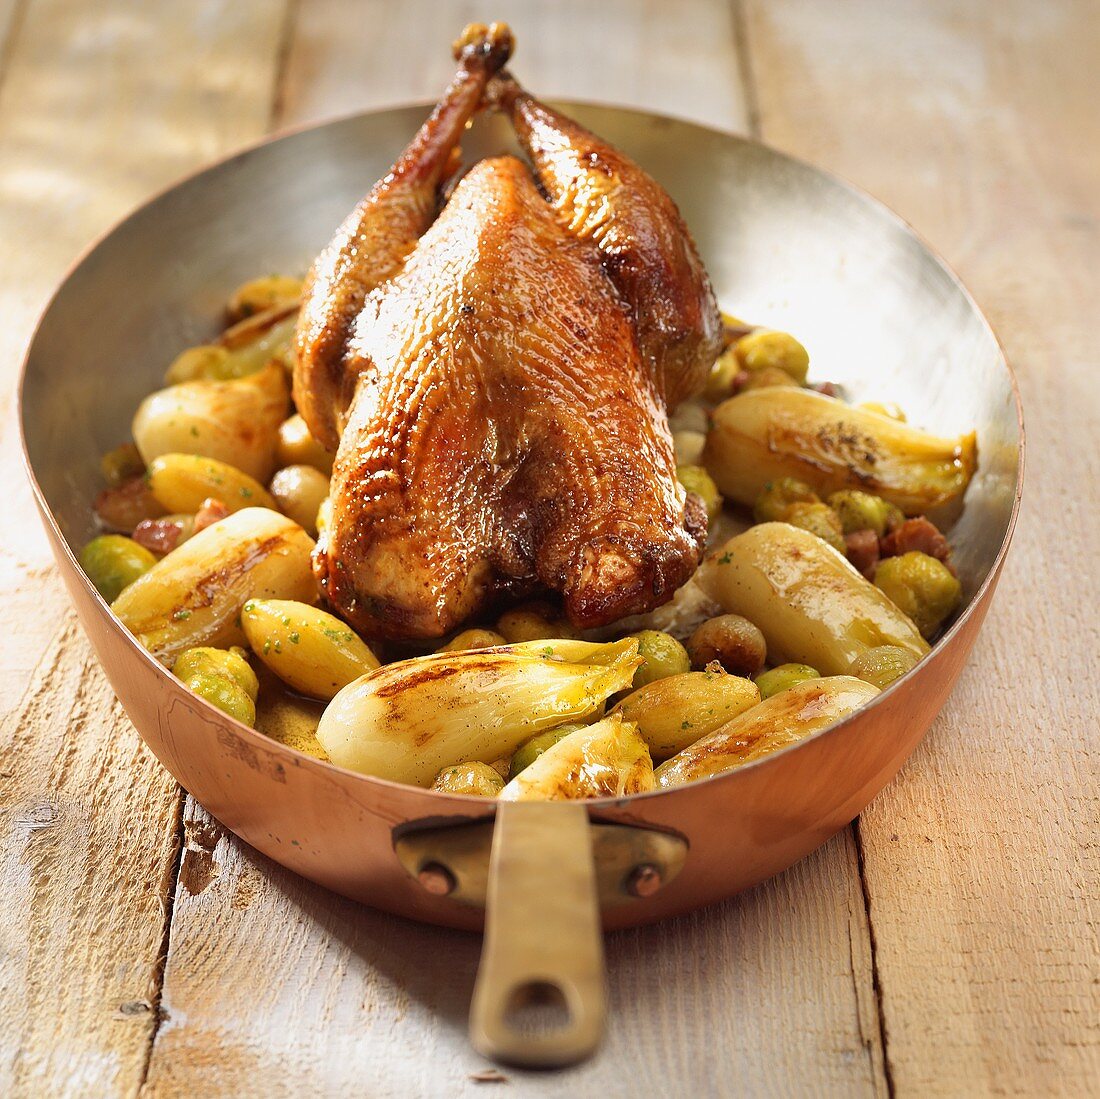 Roast chicken on chicory and Brussels sprouts